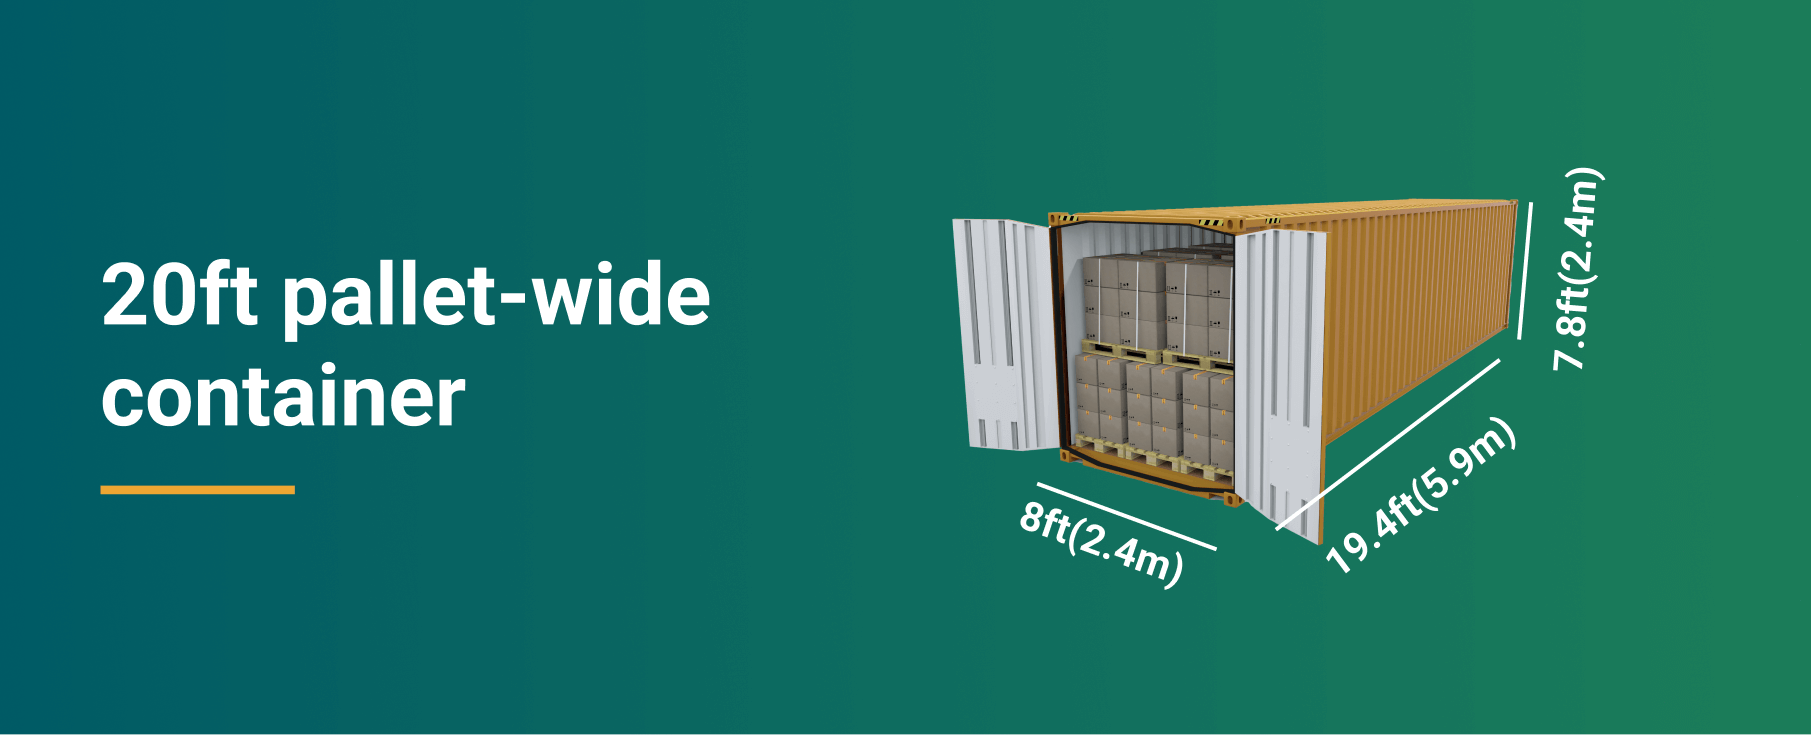 palletwide container dimensions 